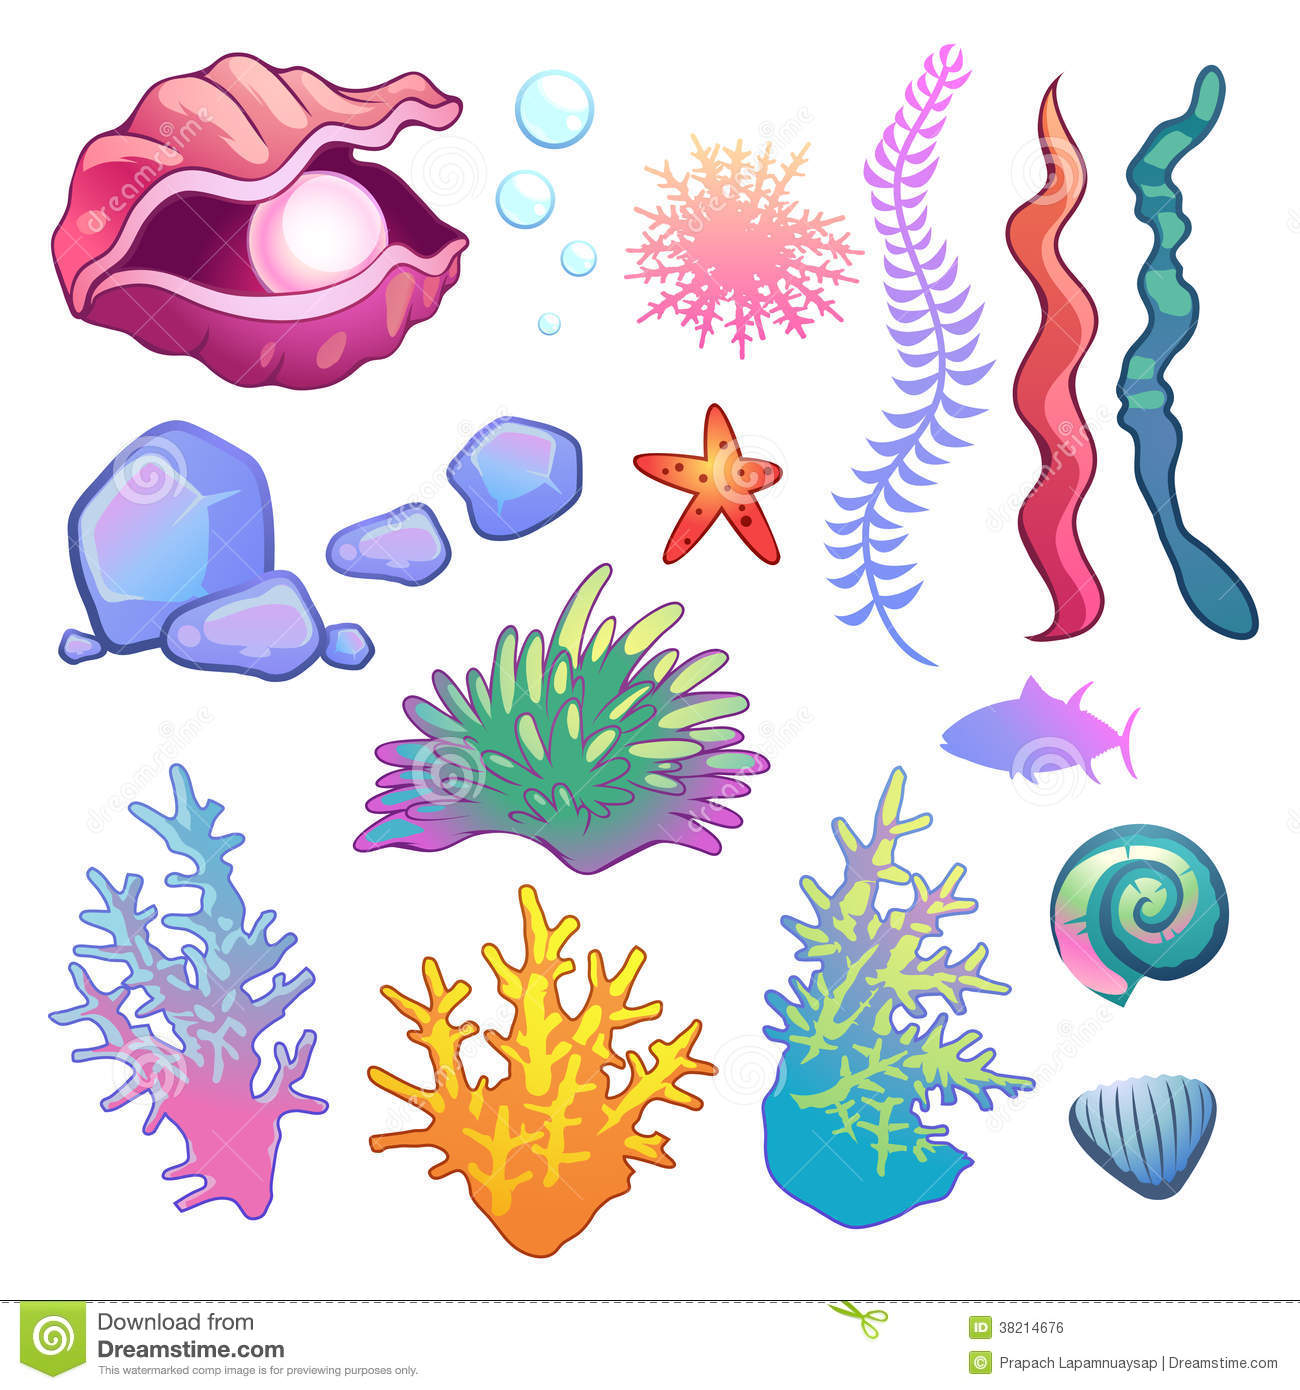 Under The Sea Clip Art Royalty Free Stock Image   Image  38214676